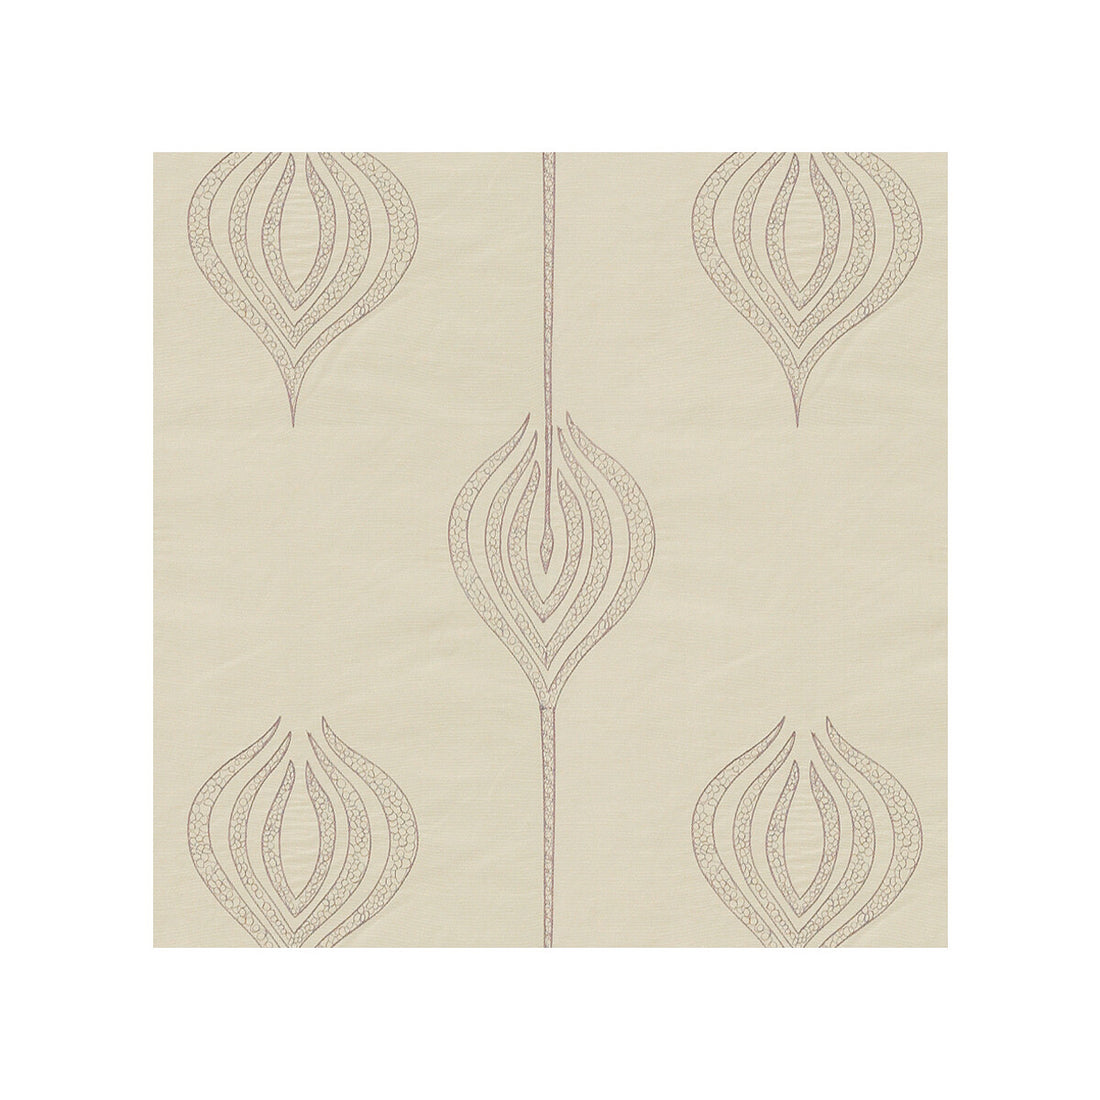 Tulip Embroidery fabric in mauve color - pattern GWF-2928.909.0 - by Lee Jofa Modern in the Allegra Hicks II collection